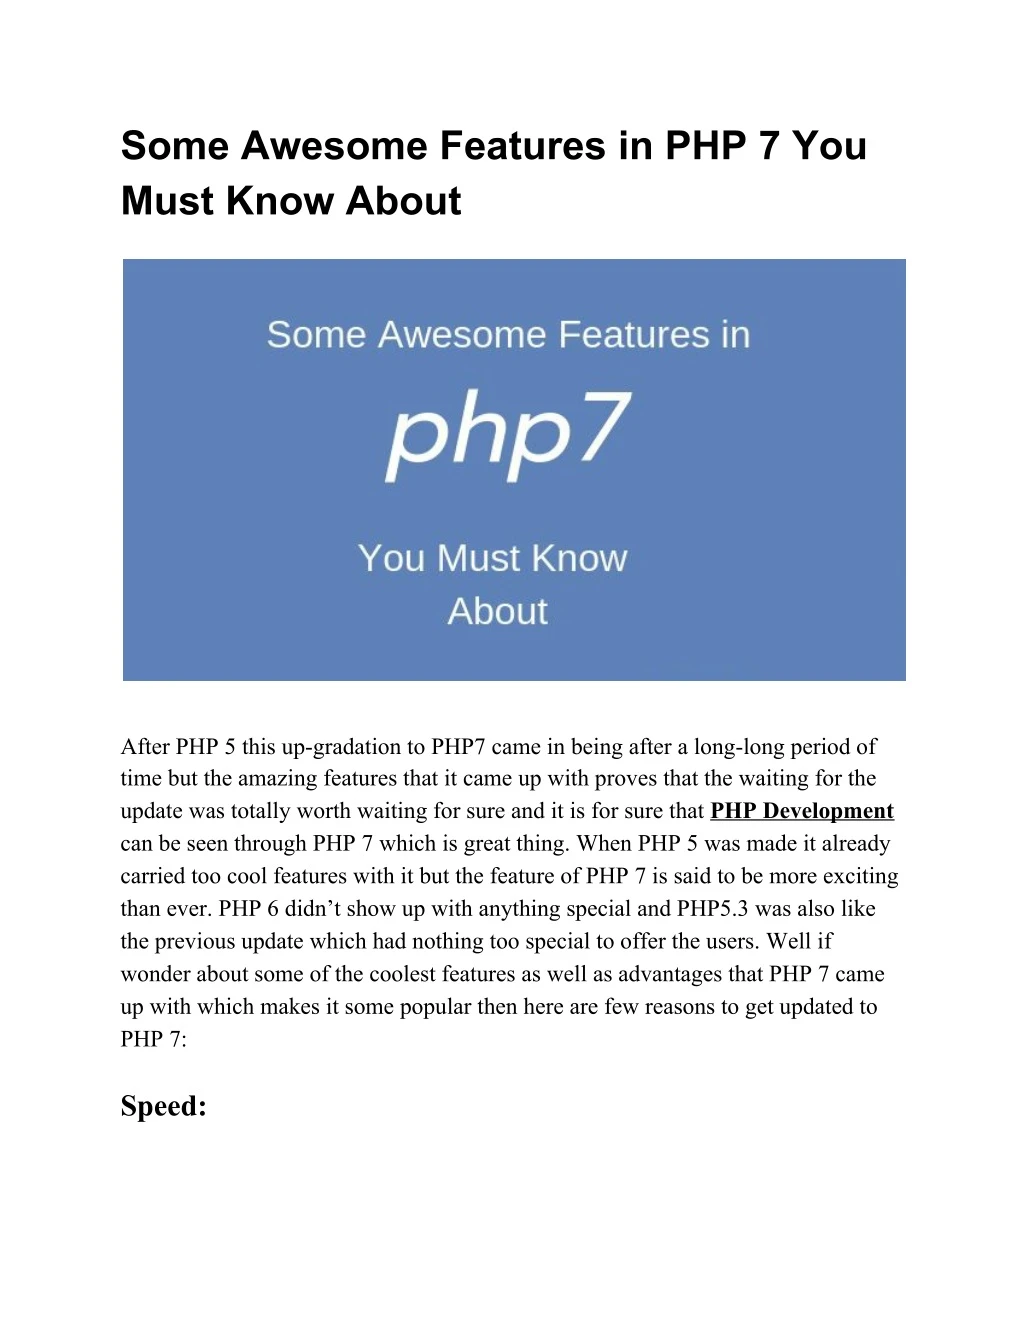 some awesome features in php 7 you must know about